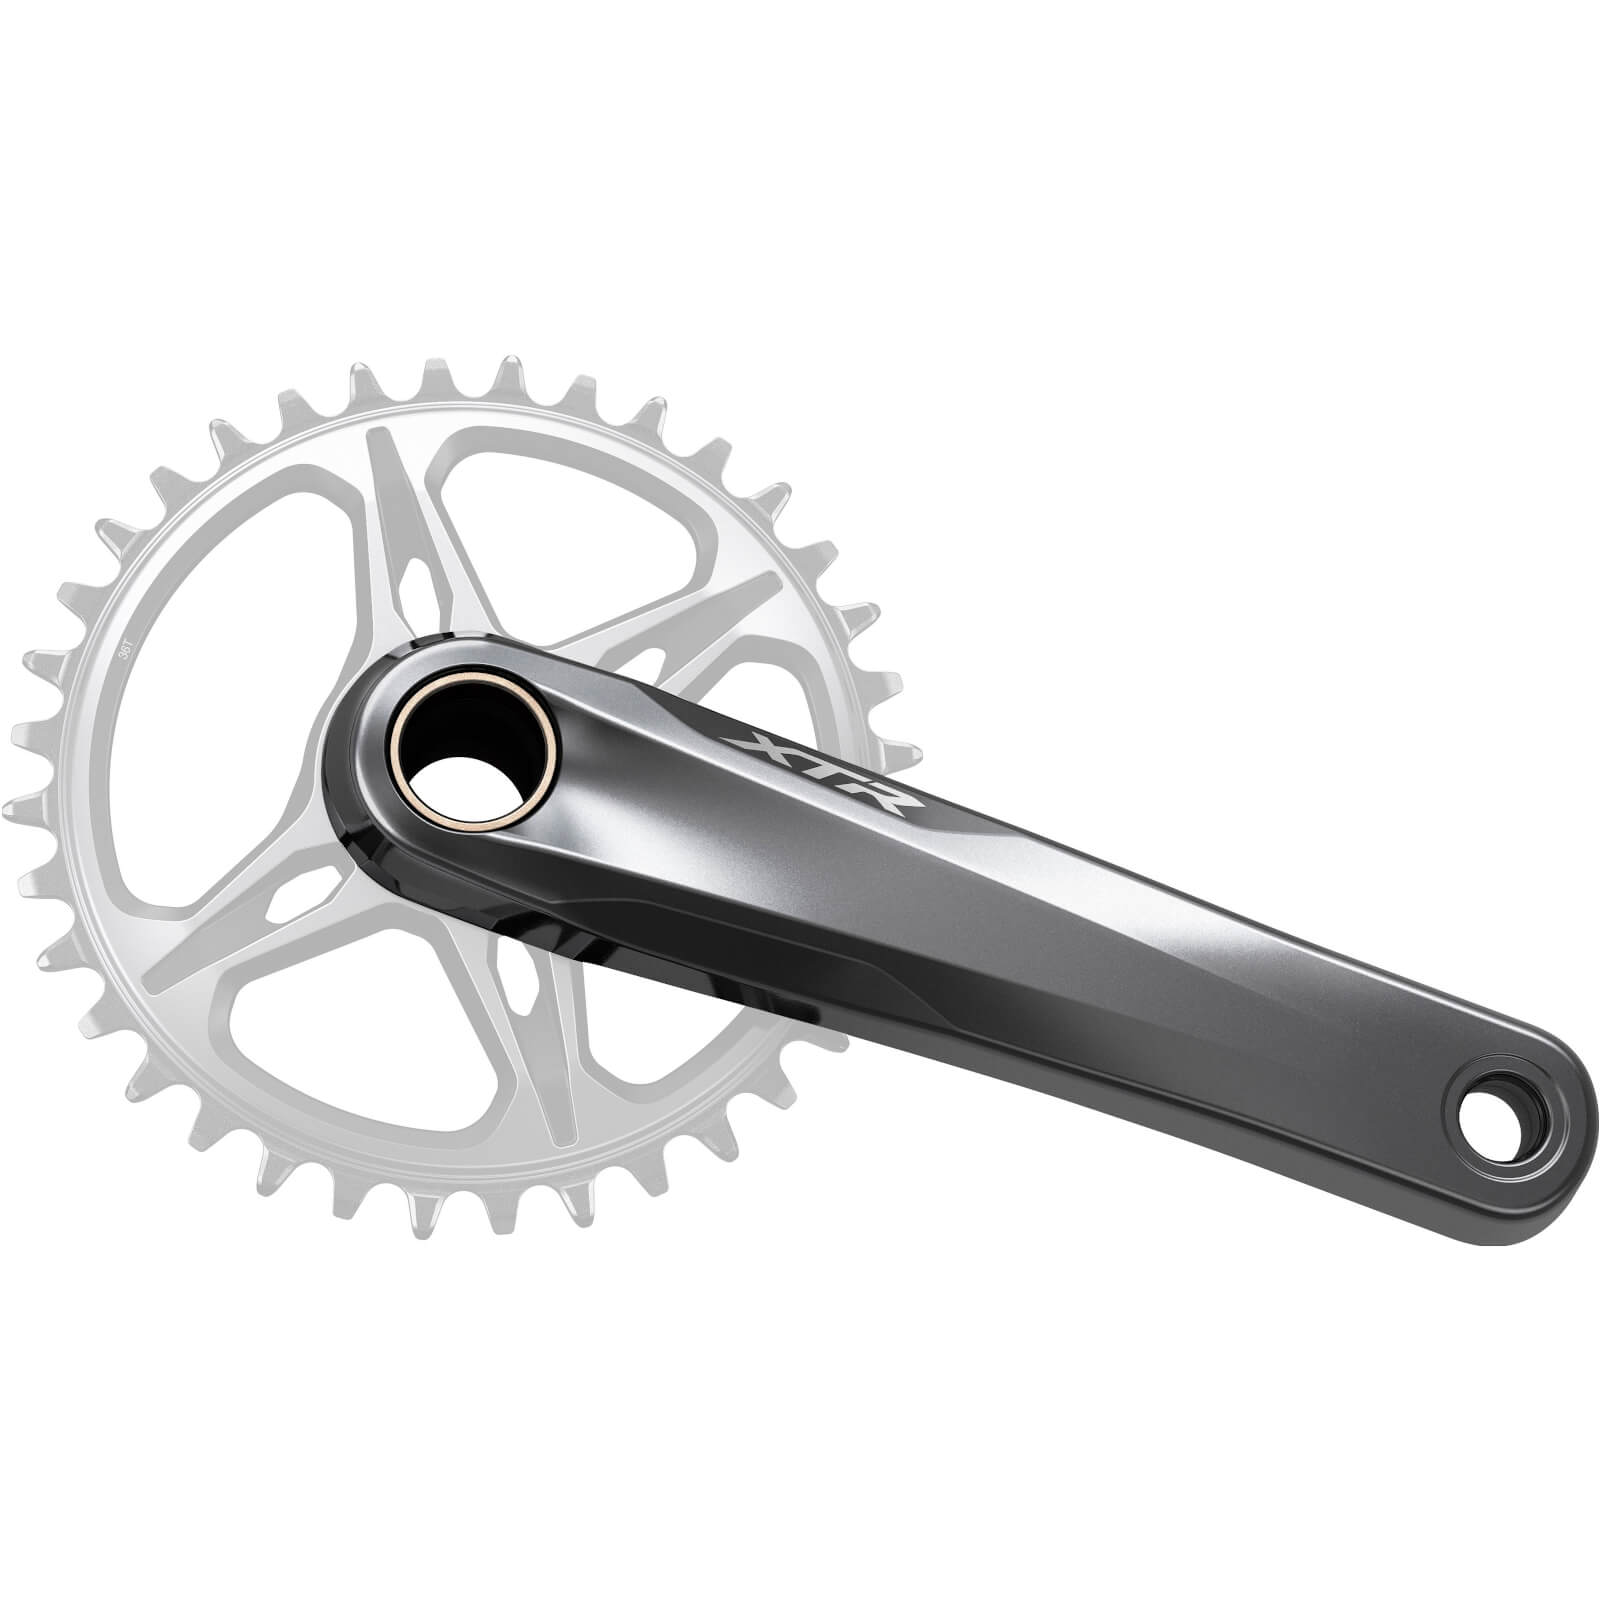 Shimano XTR M9100 Crankset without Chainring - 175mm